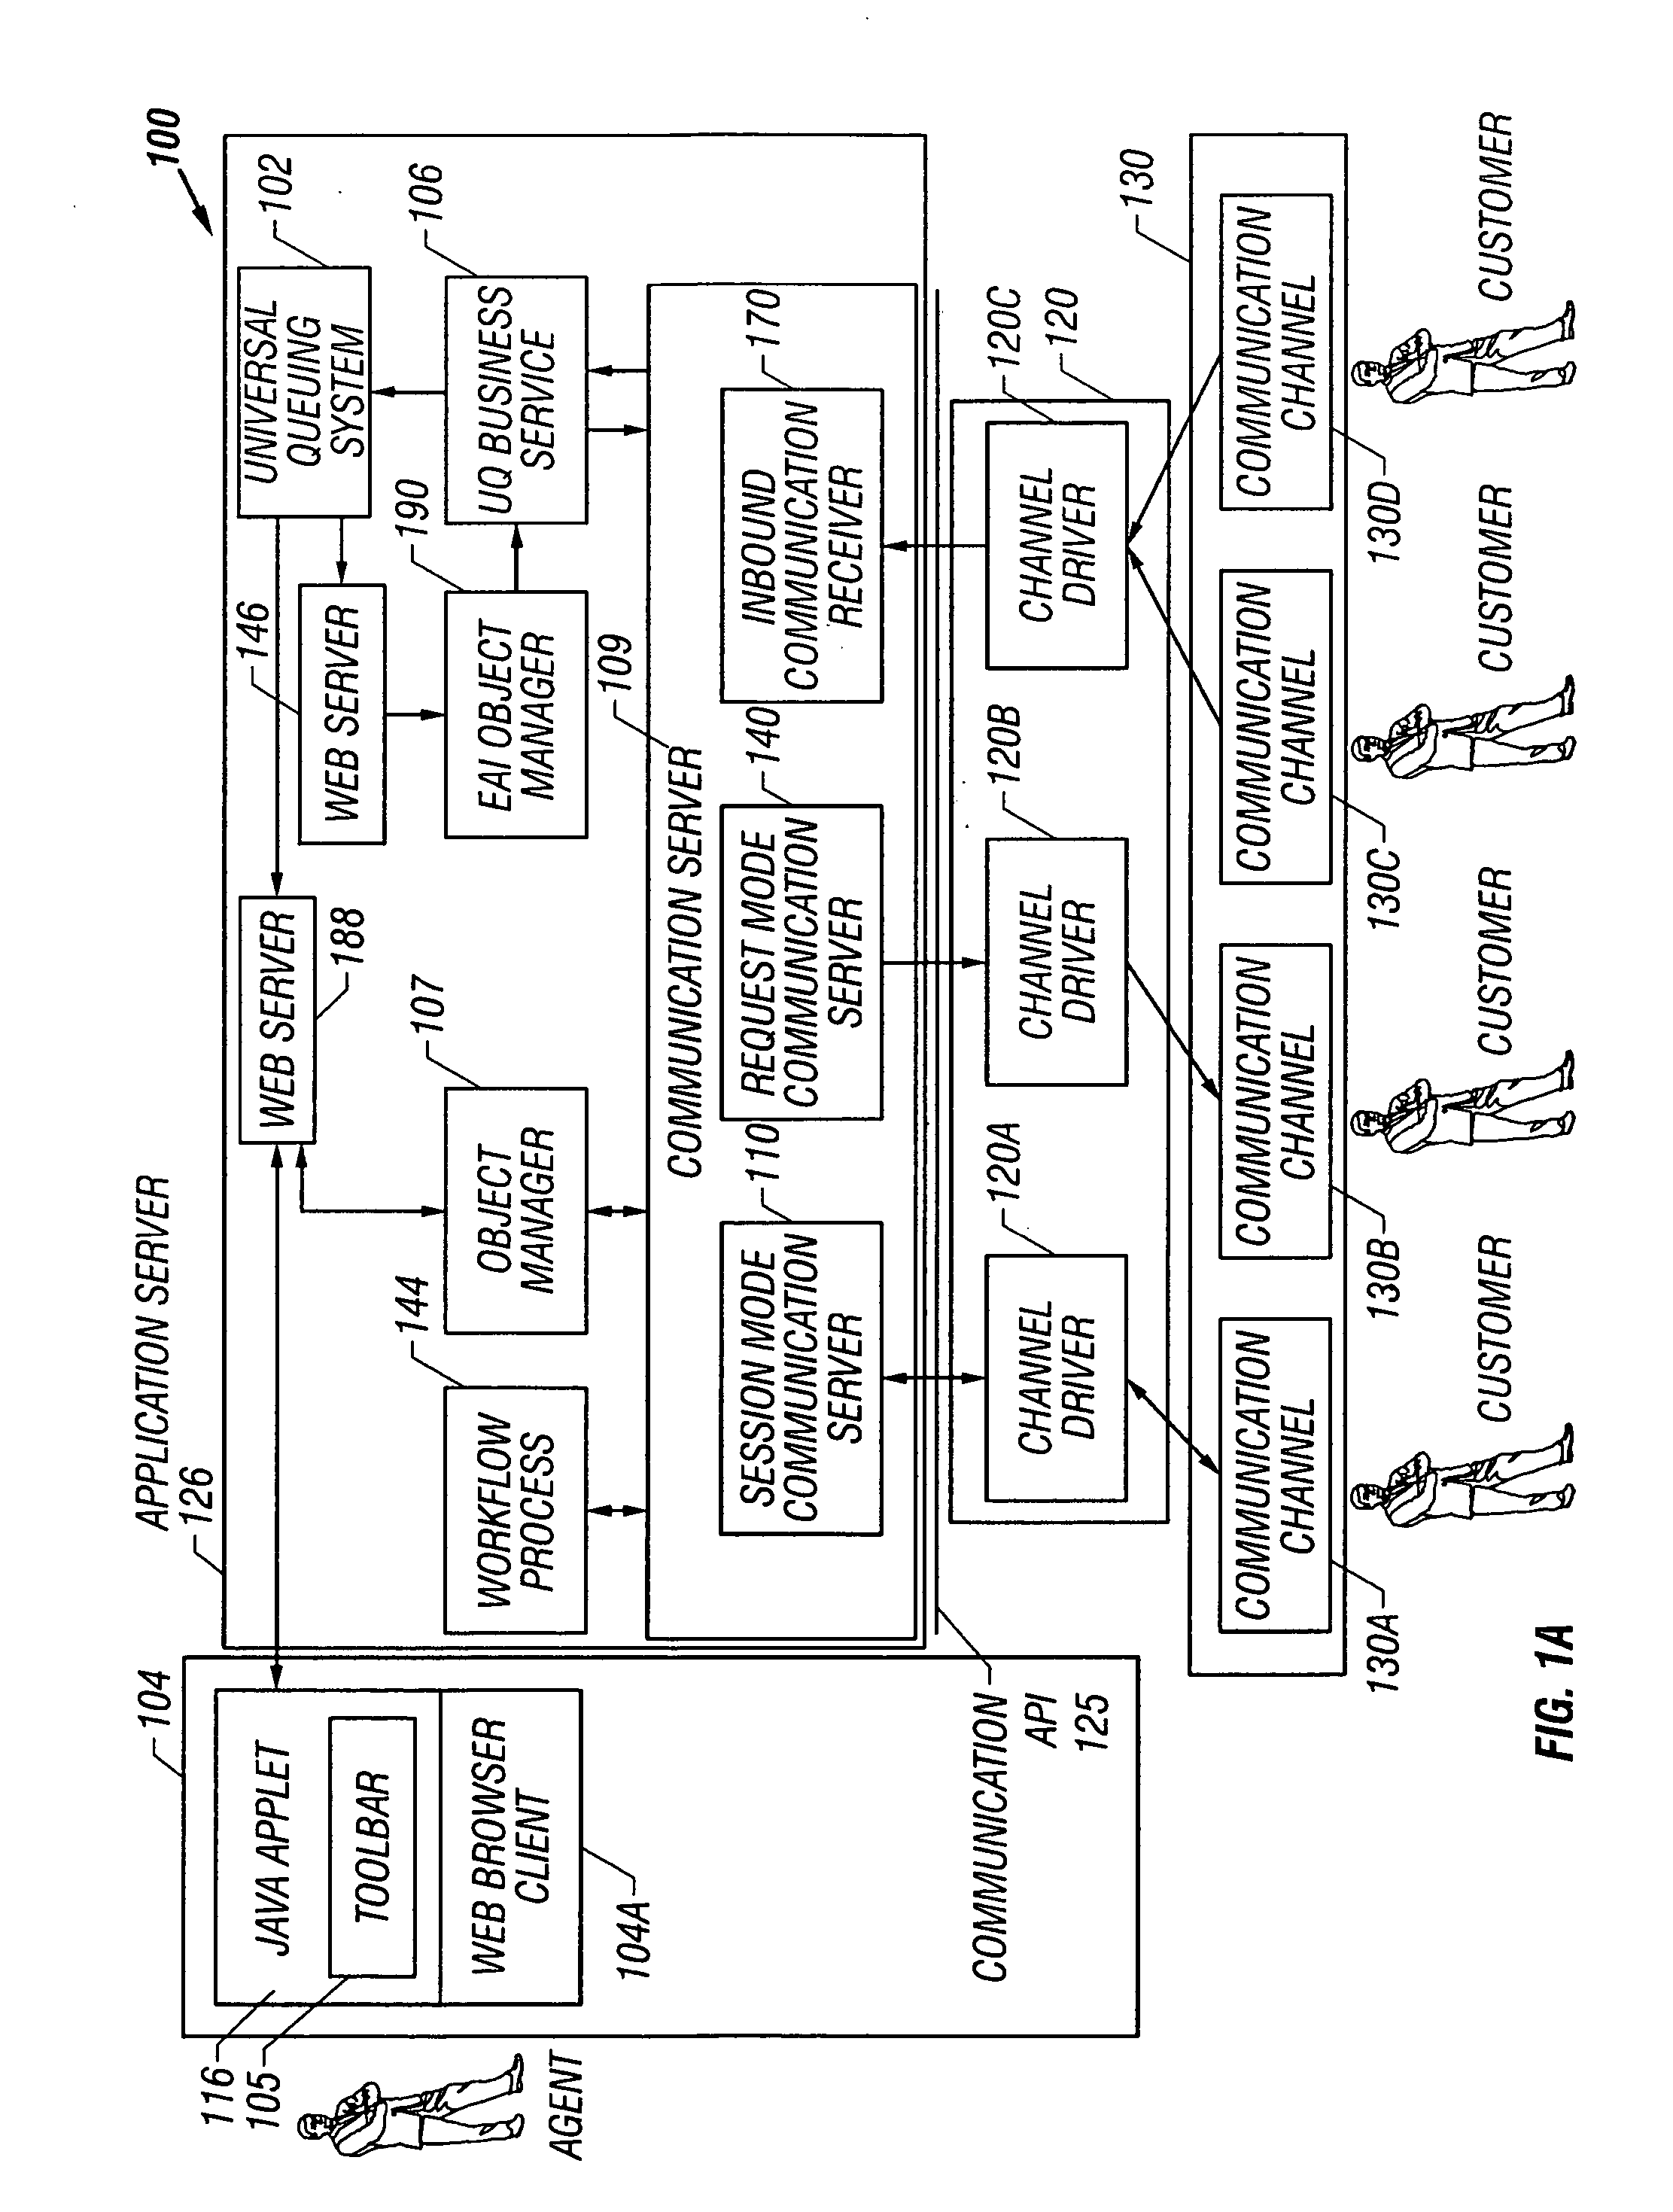 Extensible interface for inter-module communication